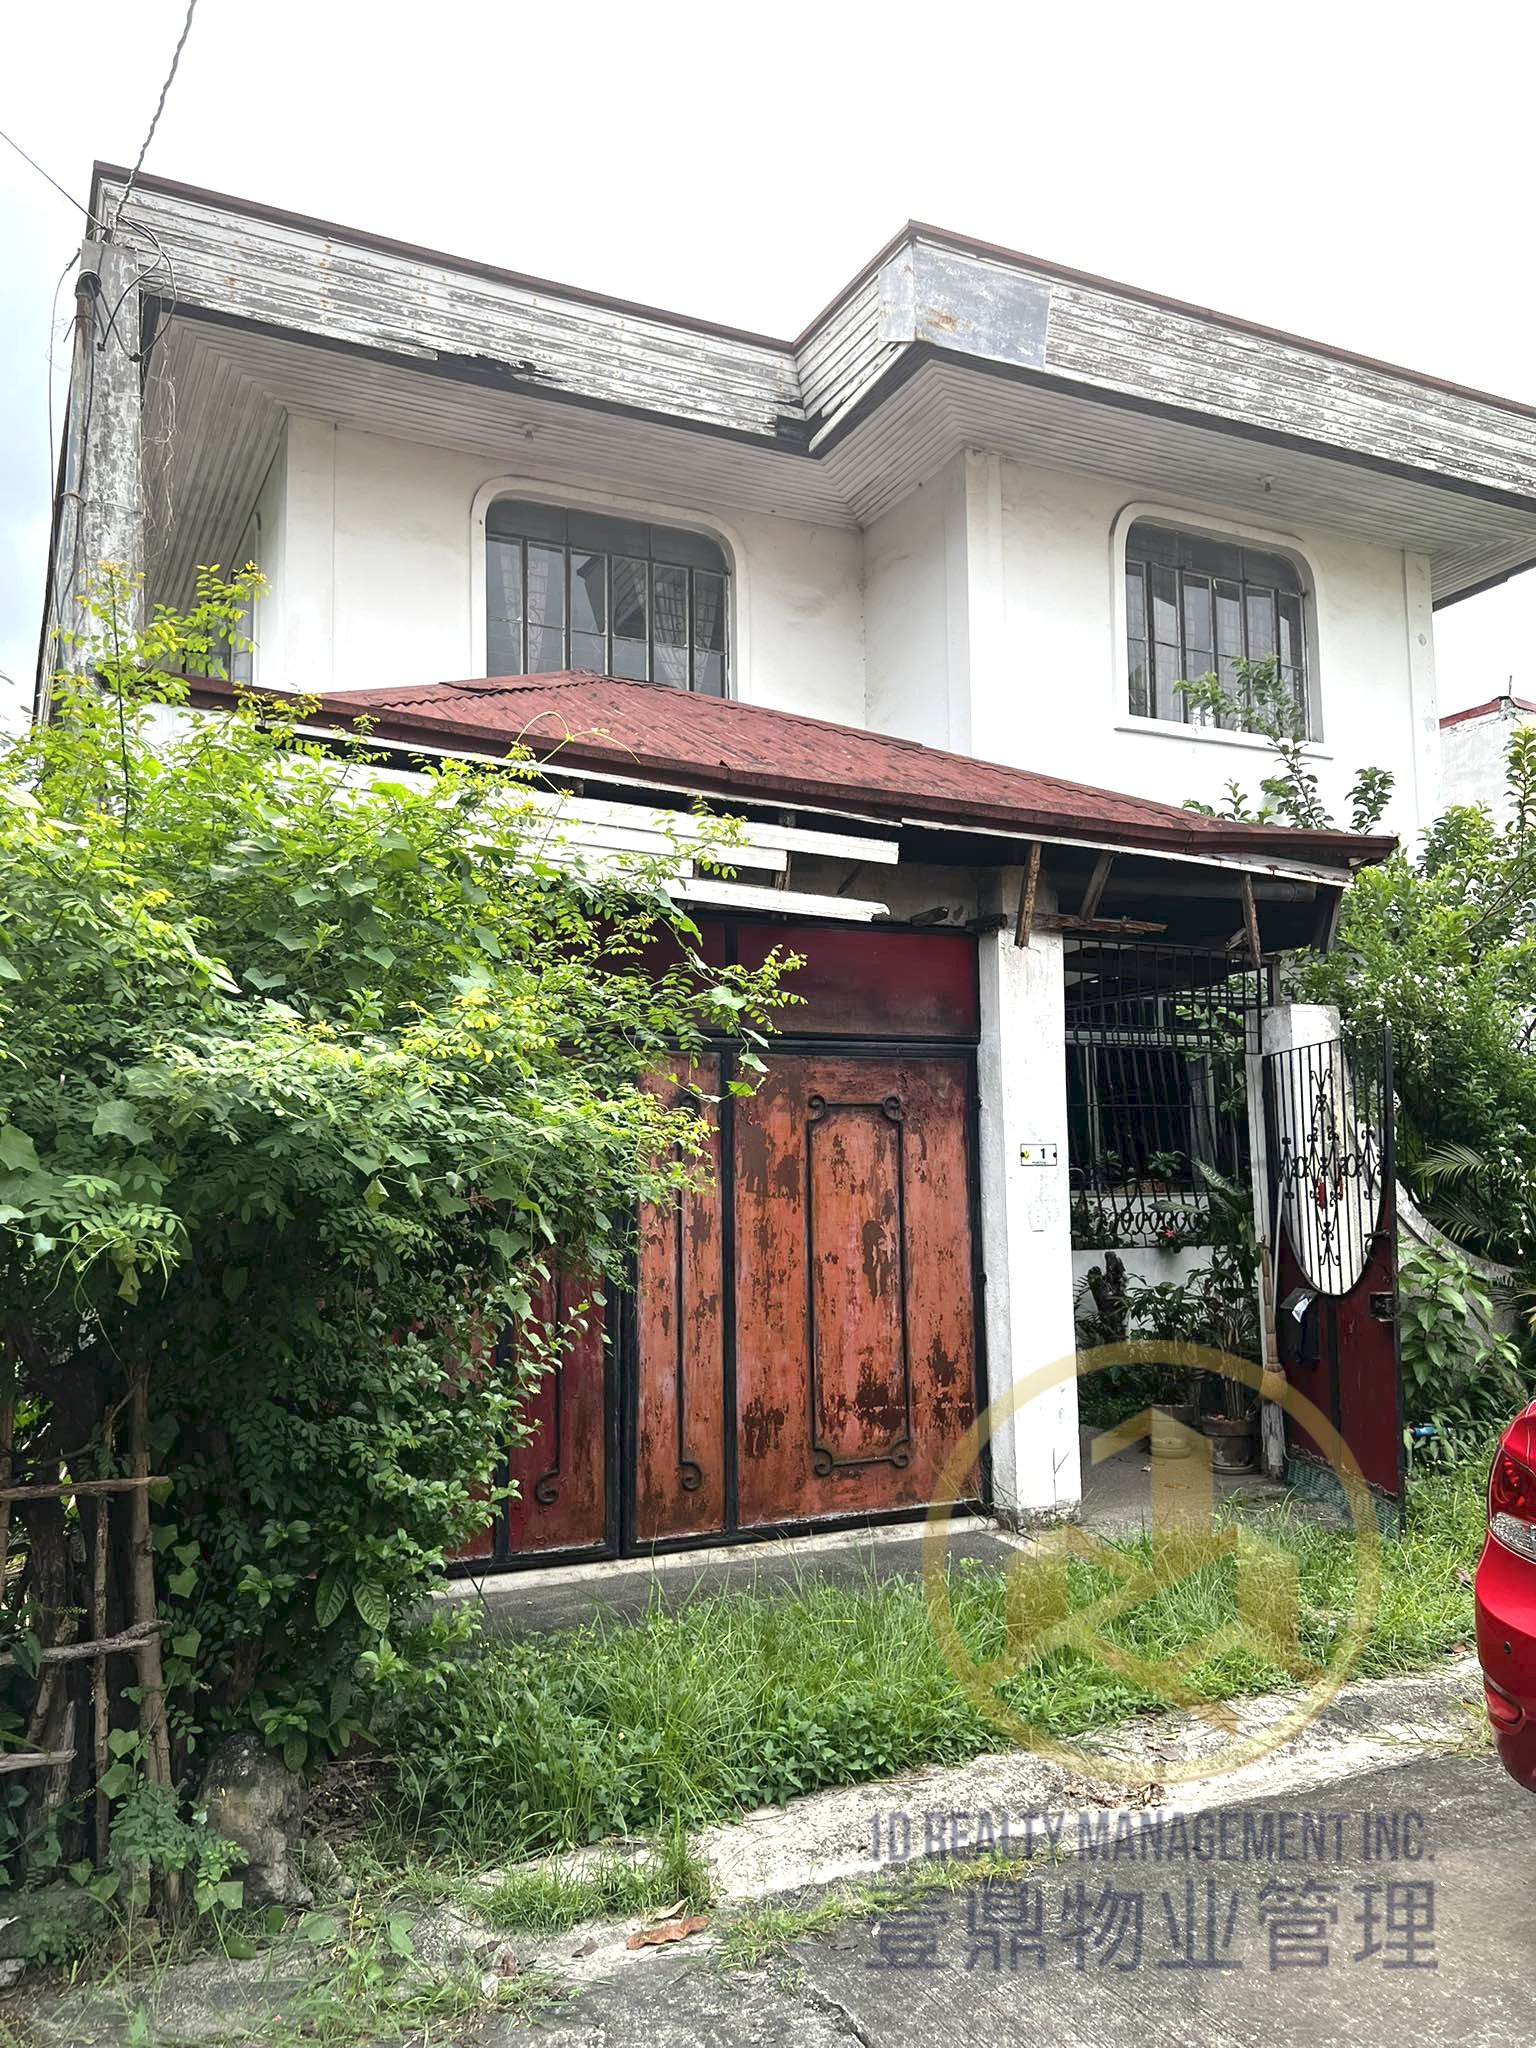 Greenpark Village - Cainta Rizal - For Sale House & Lot